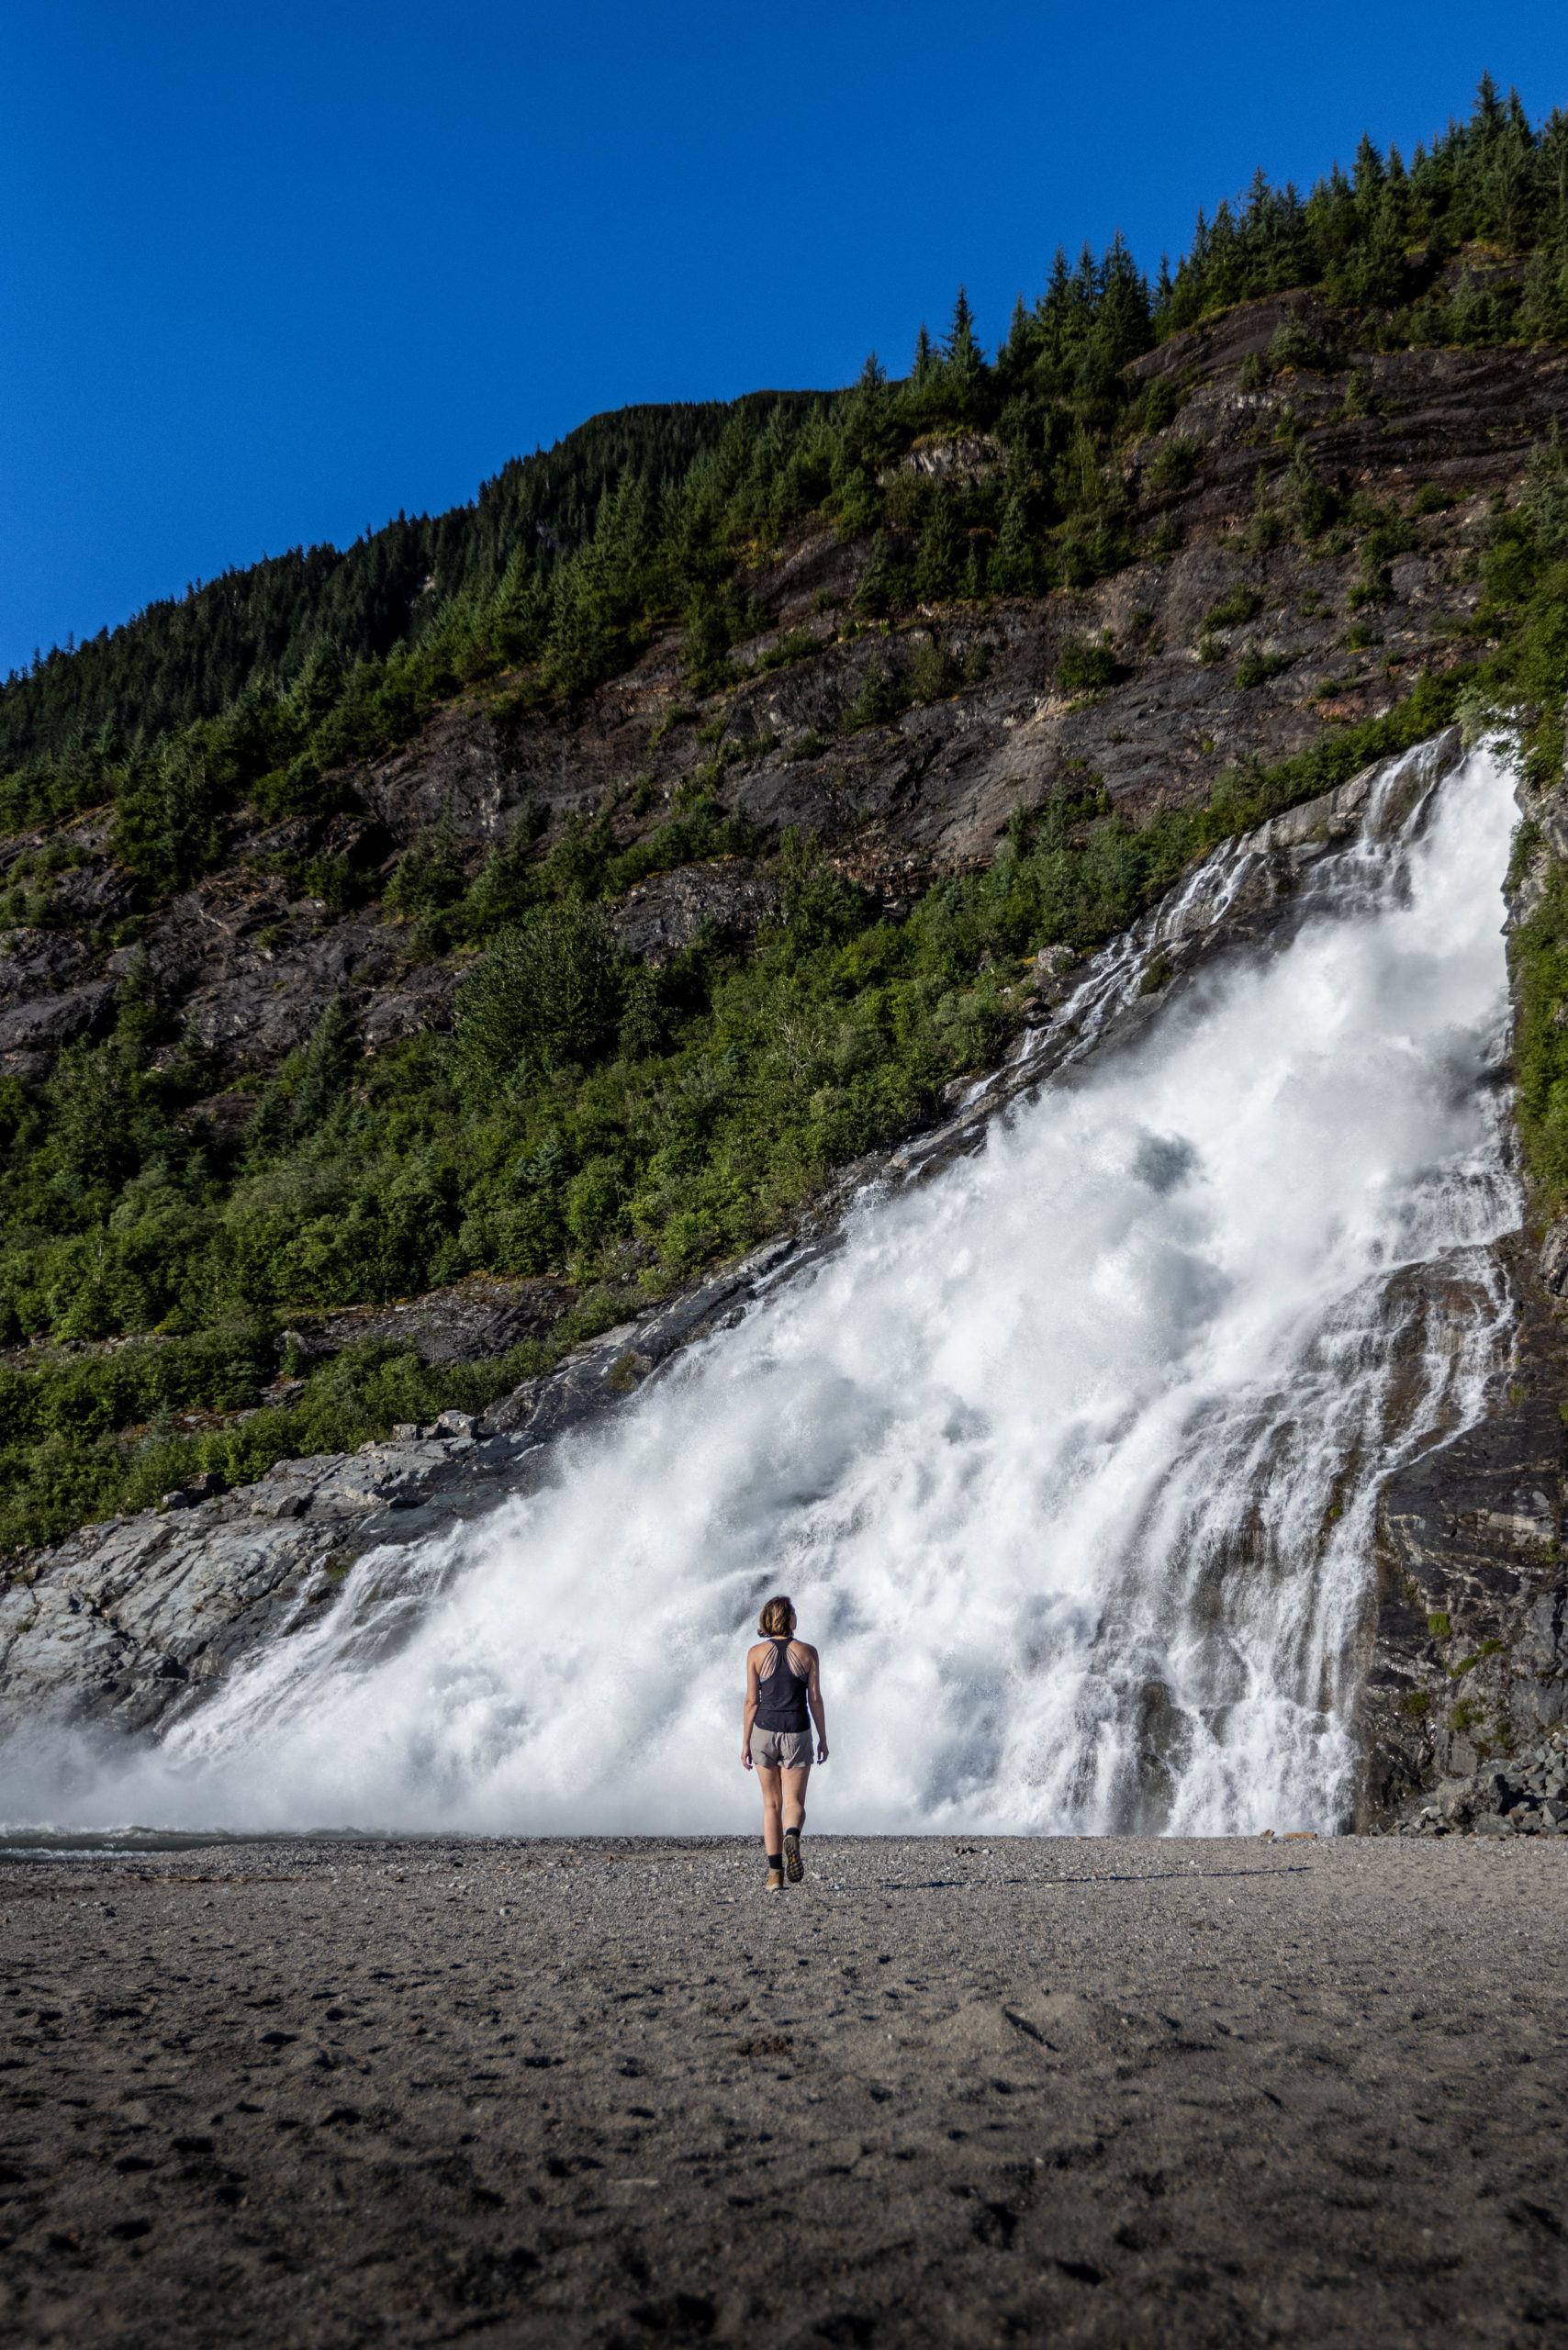 Lindsay, One Girl Wandering, stands in front of Nugget Falls in Juneau, Alaska